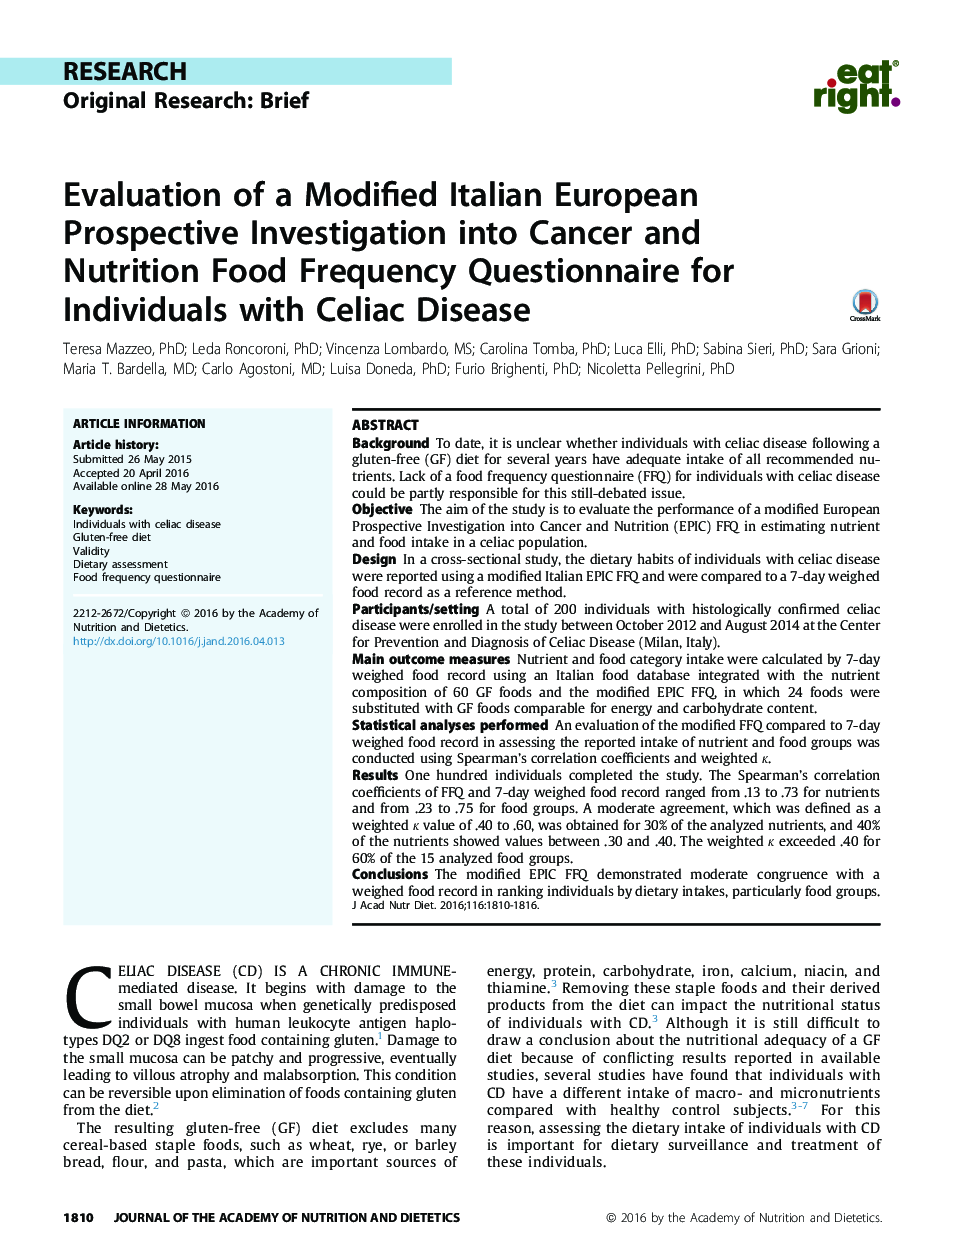 Evaluation of a Modified Italian European Prospective Investigation into Cancer and Nutrition Food Frequency Questionnaire for Individuals with Celiac Disease